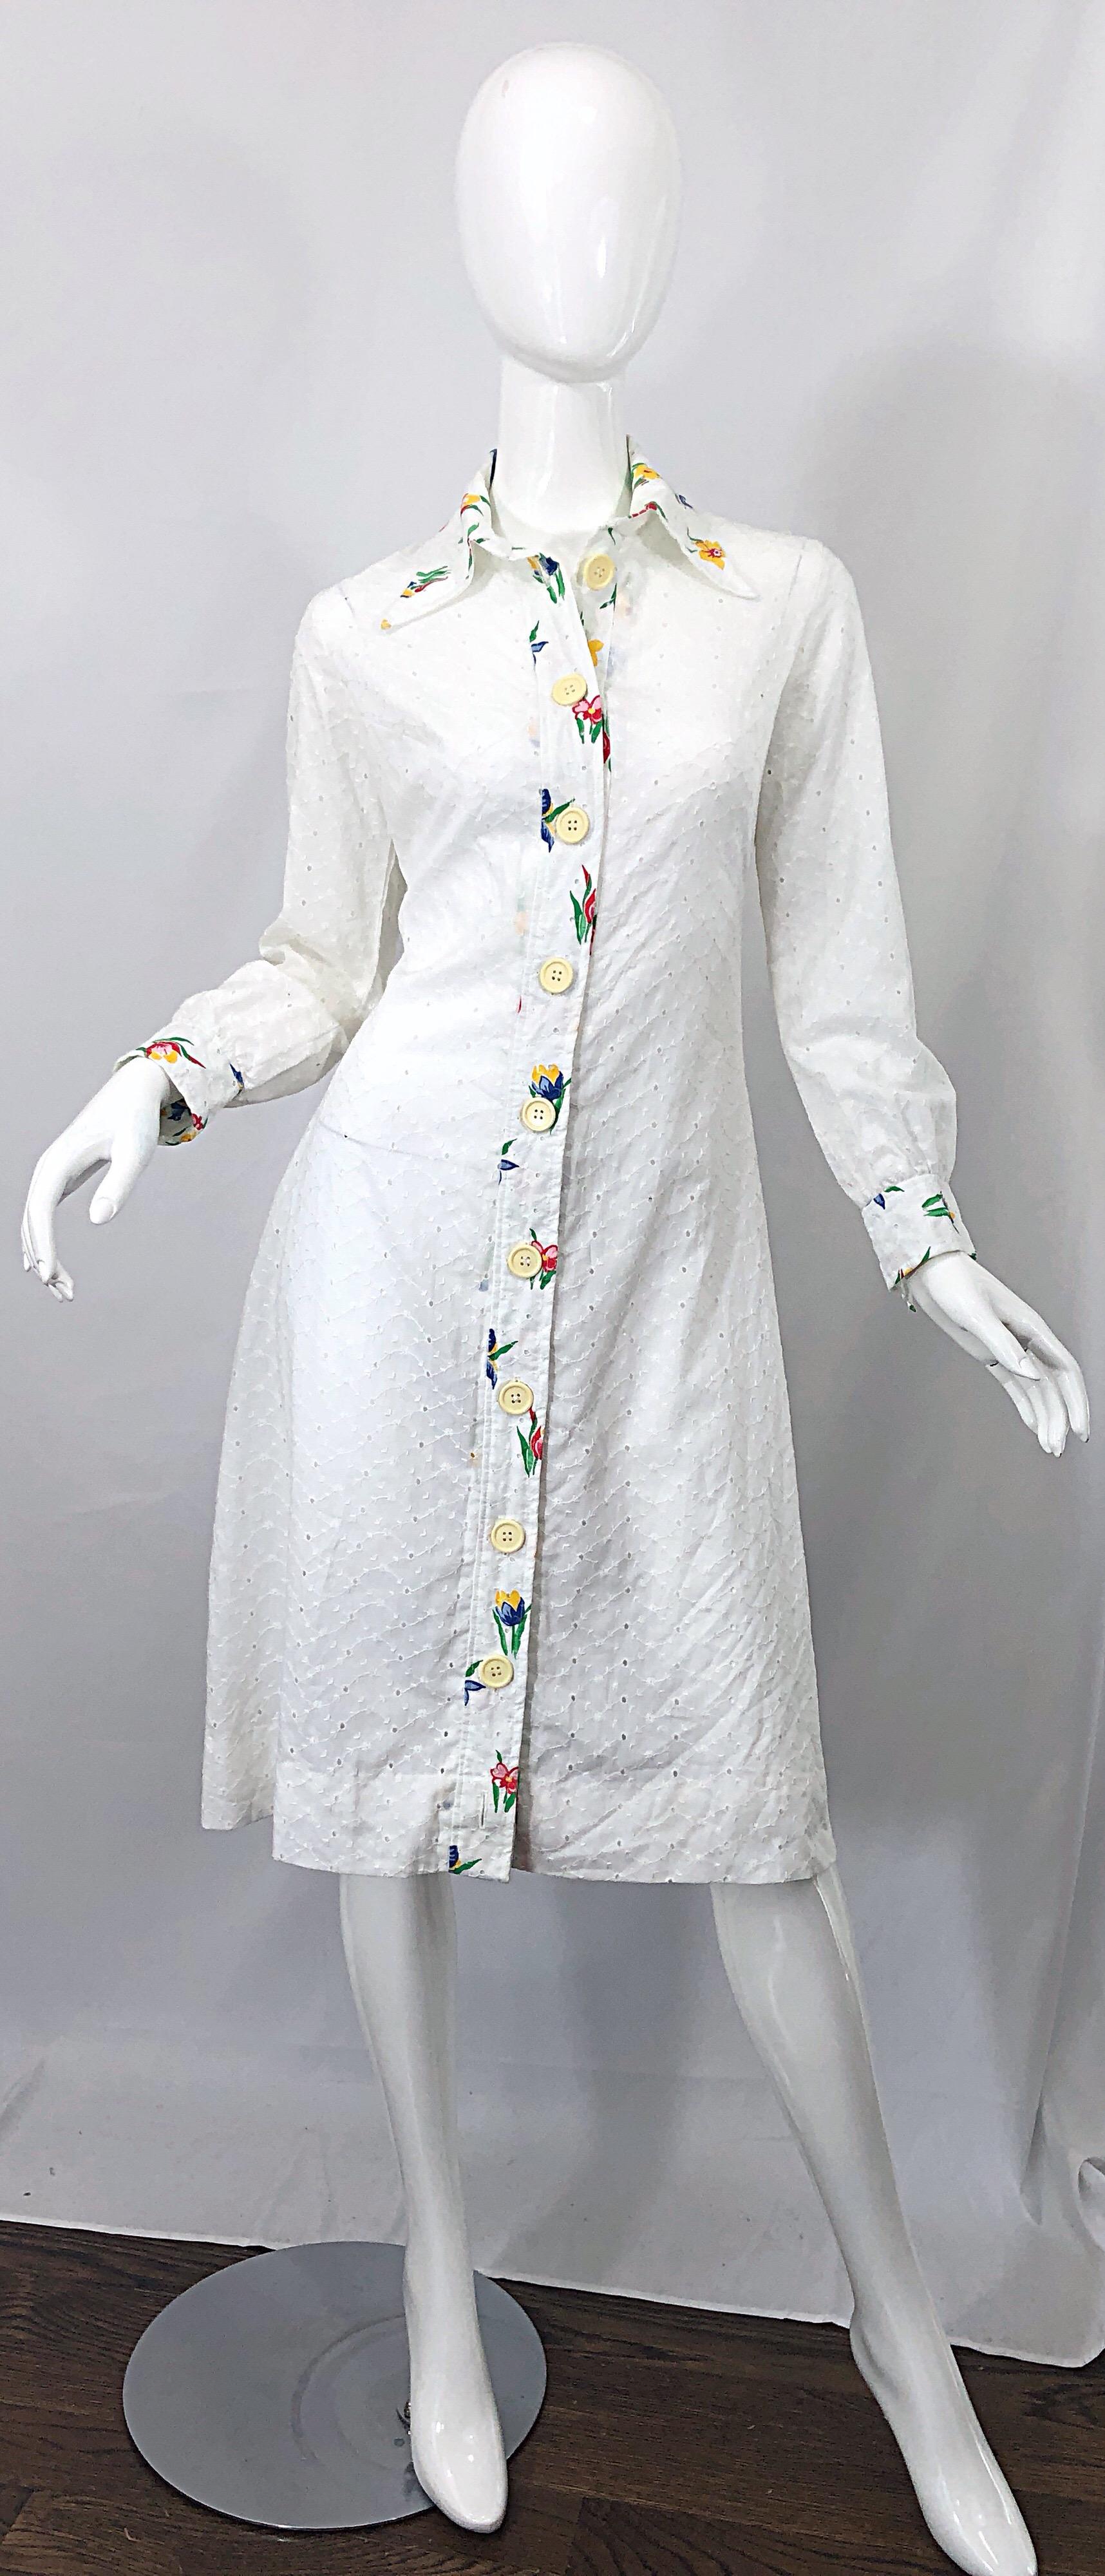 1970s Joseph Magnin White Eyelet Cotton Embrodiered Vintage 70s Shirt Dress For Sale 8